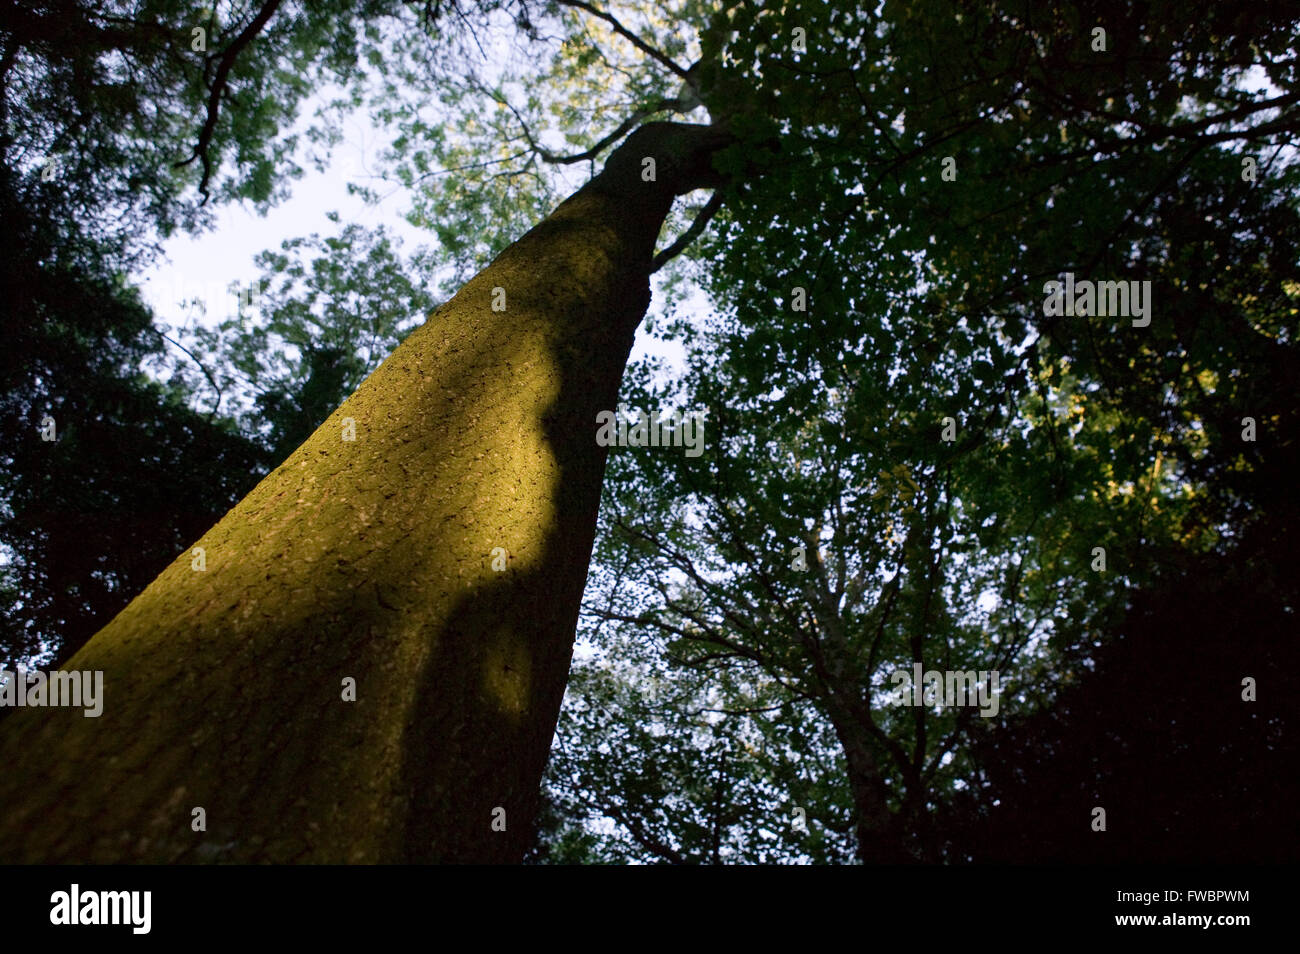 A beam of evening light falls across the trunk of an ancient tree in a dense forest making it shine out in relief against the dark backdrop of the wood in shadow underneath the great canopy of leaves and branches. Stock Photo